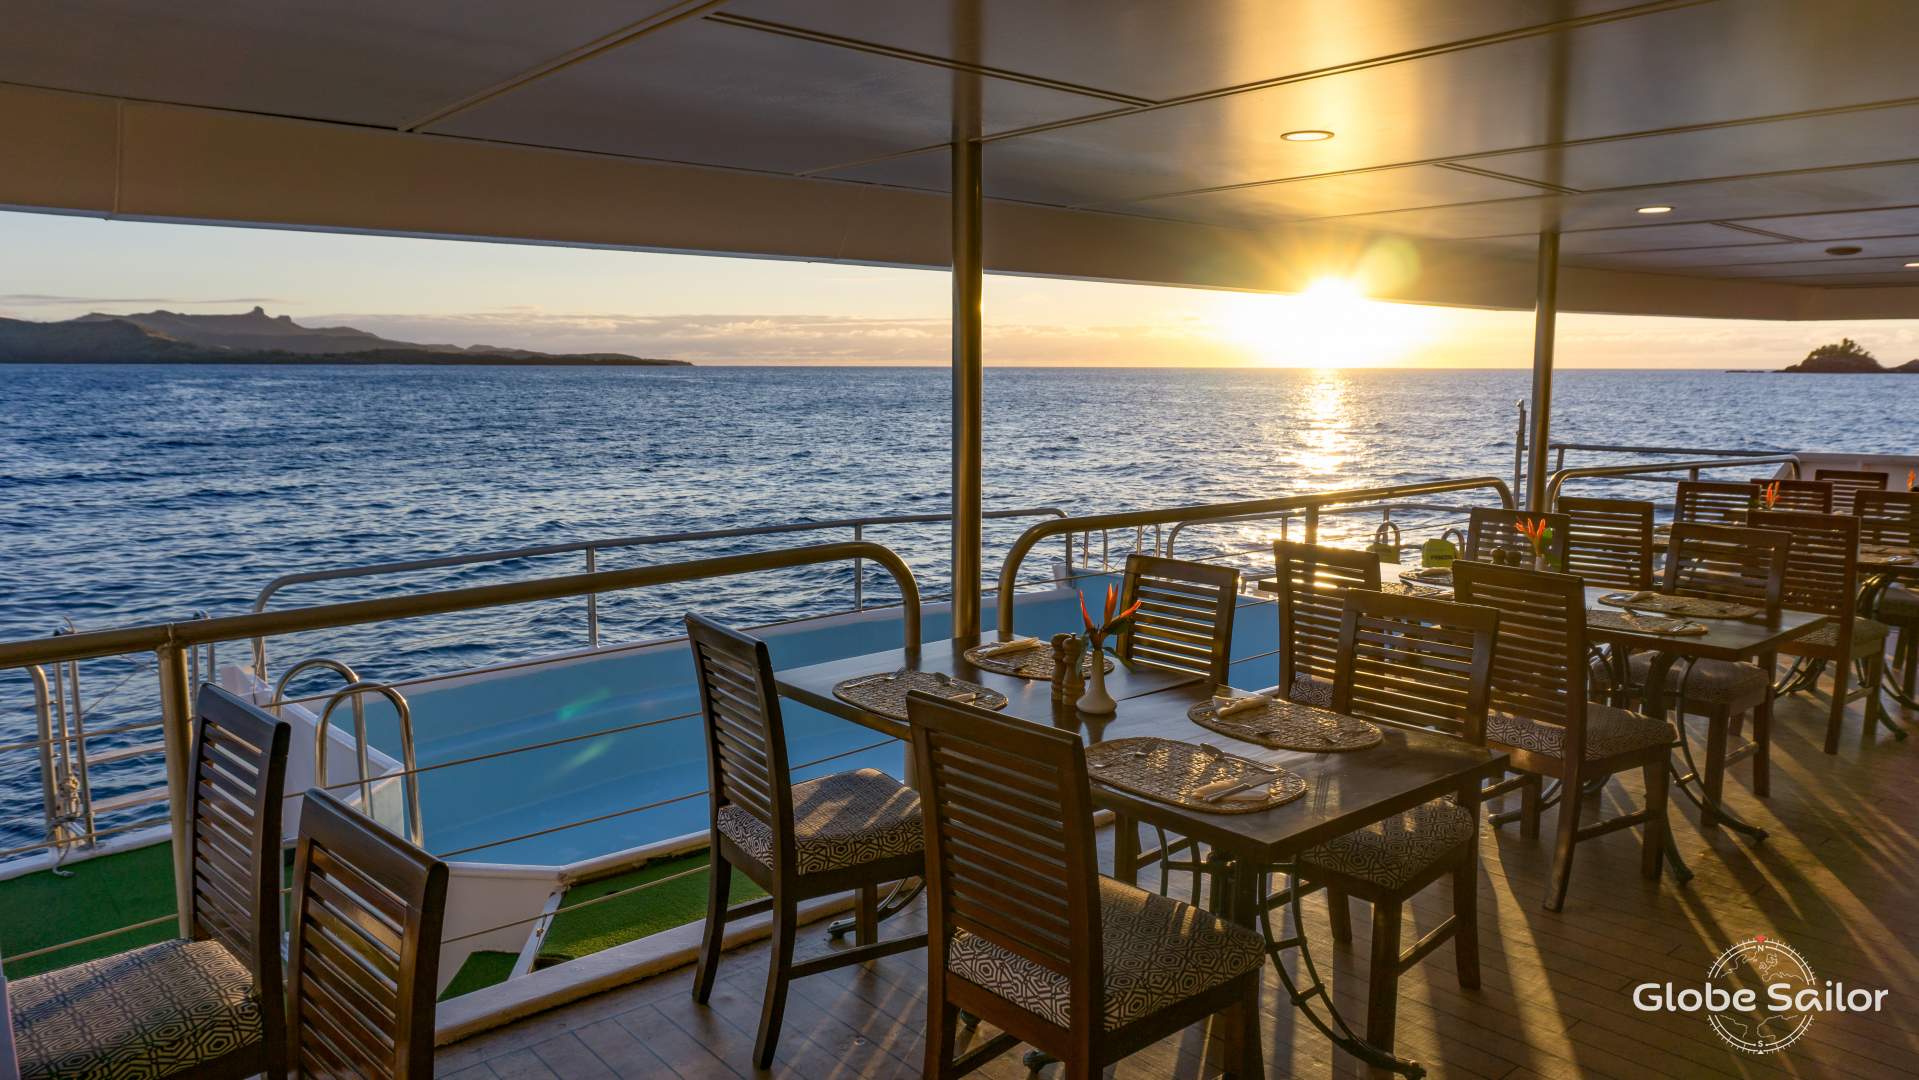 Enjoy the sunsets from the terrace